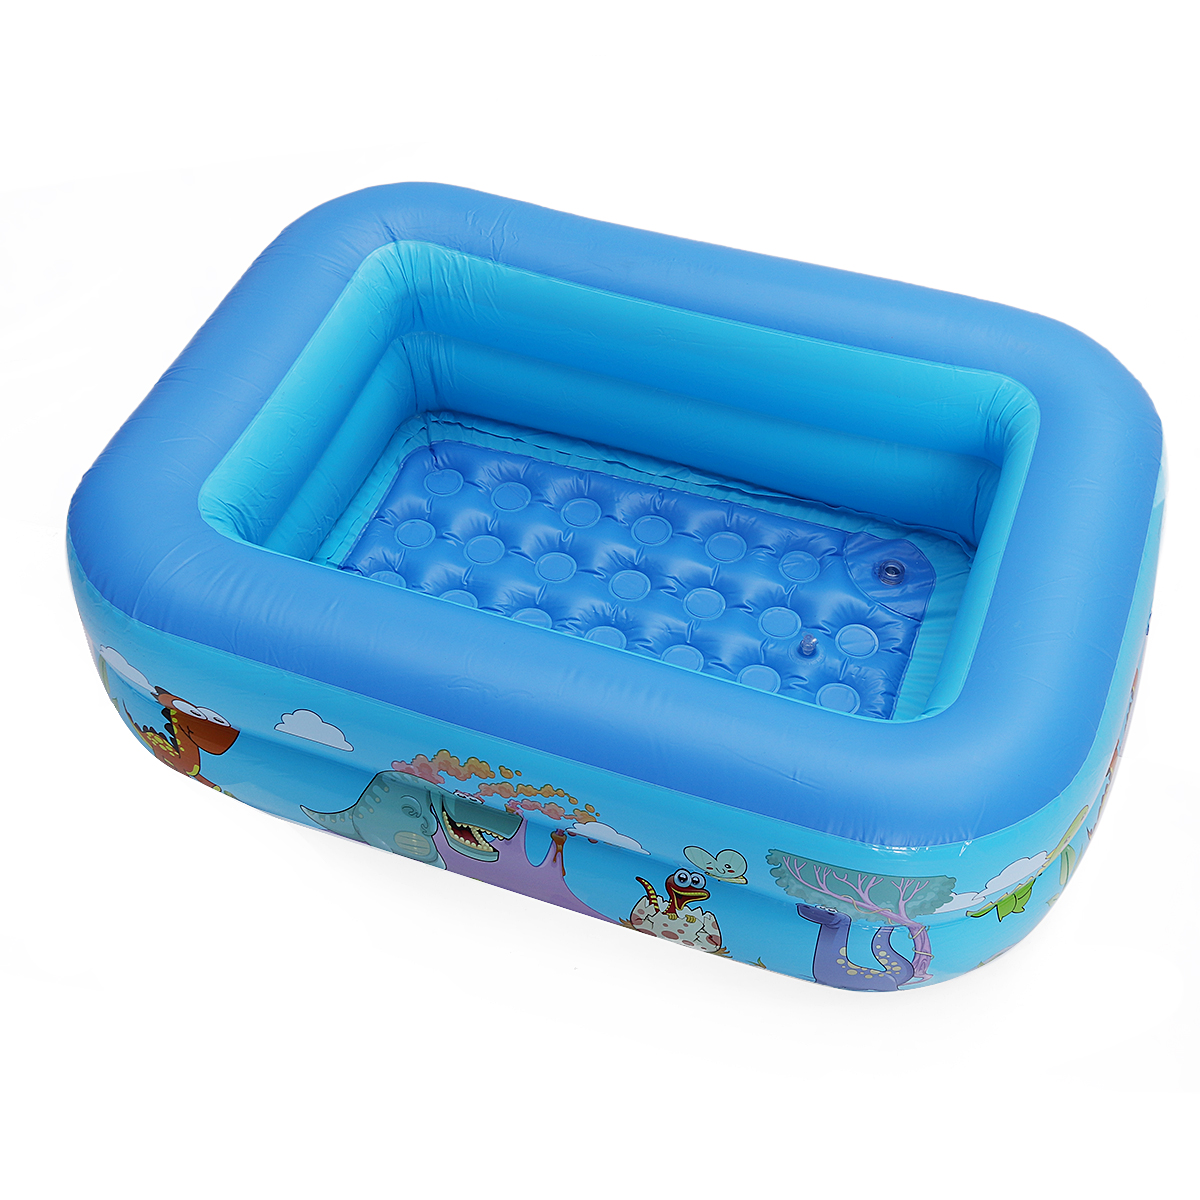 120130150cm-Inflatable-Swimming-Pool-Family-Bathing-Tub-Playing-Pool-Outdoor-Indoor-Garden-1813649-3